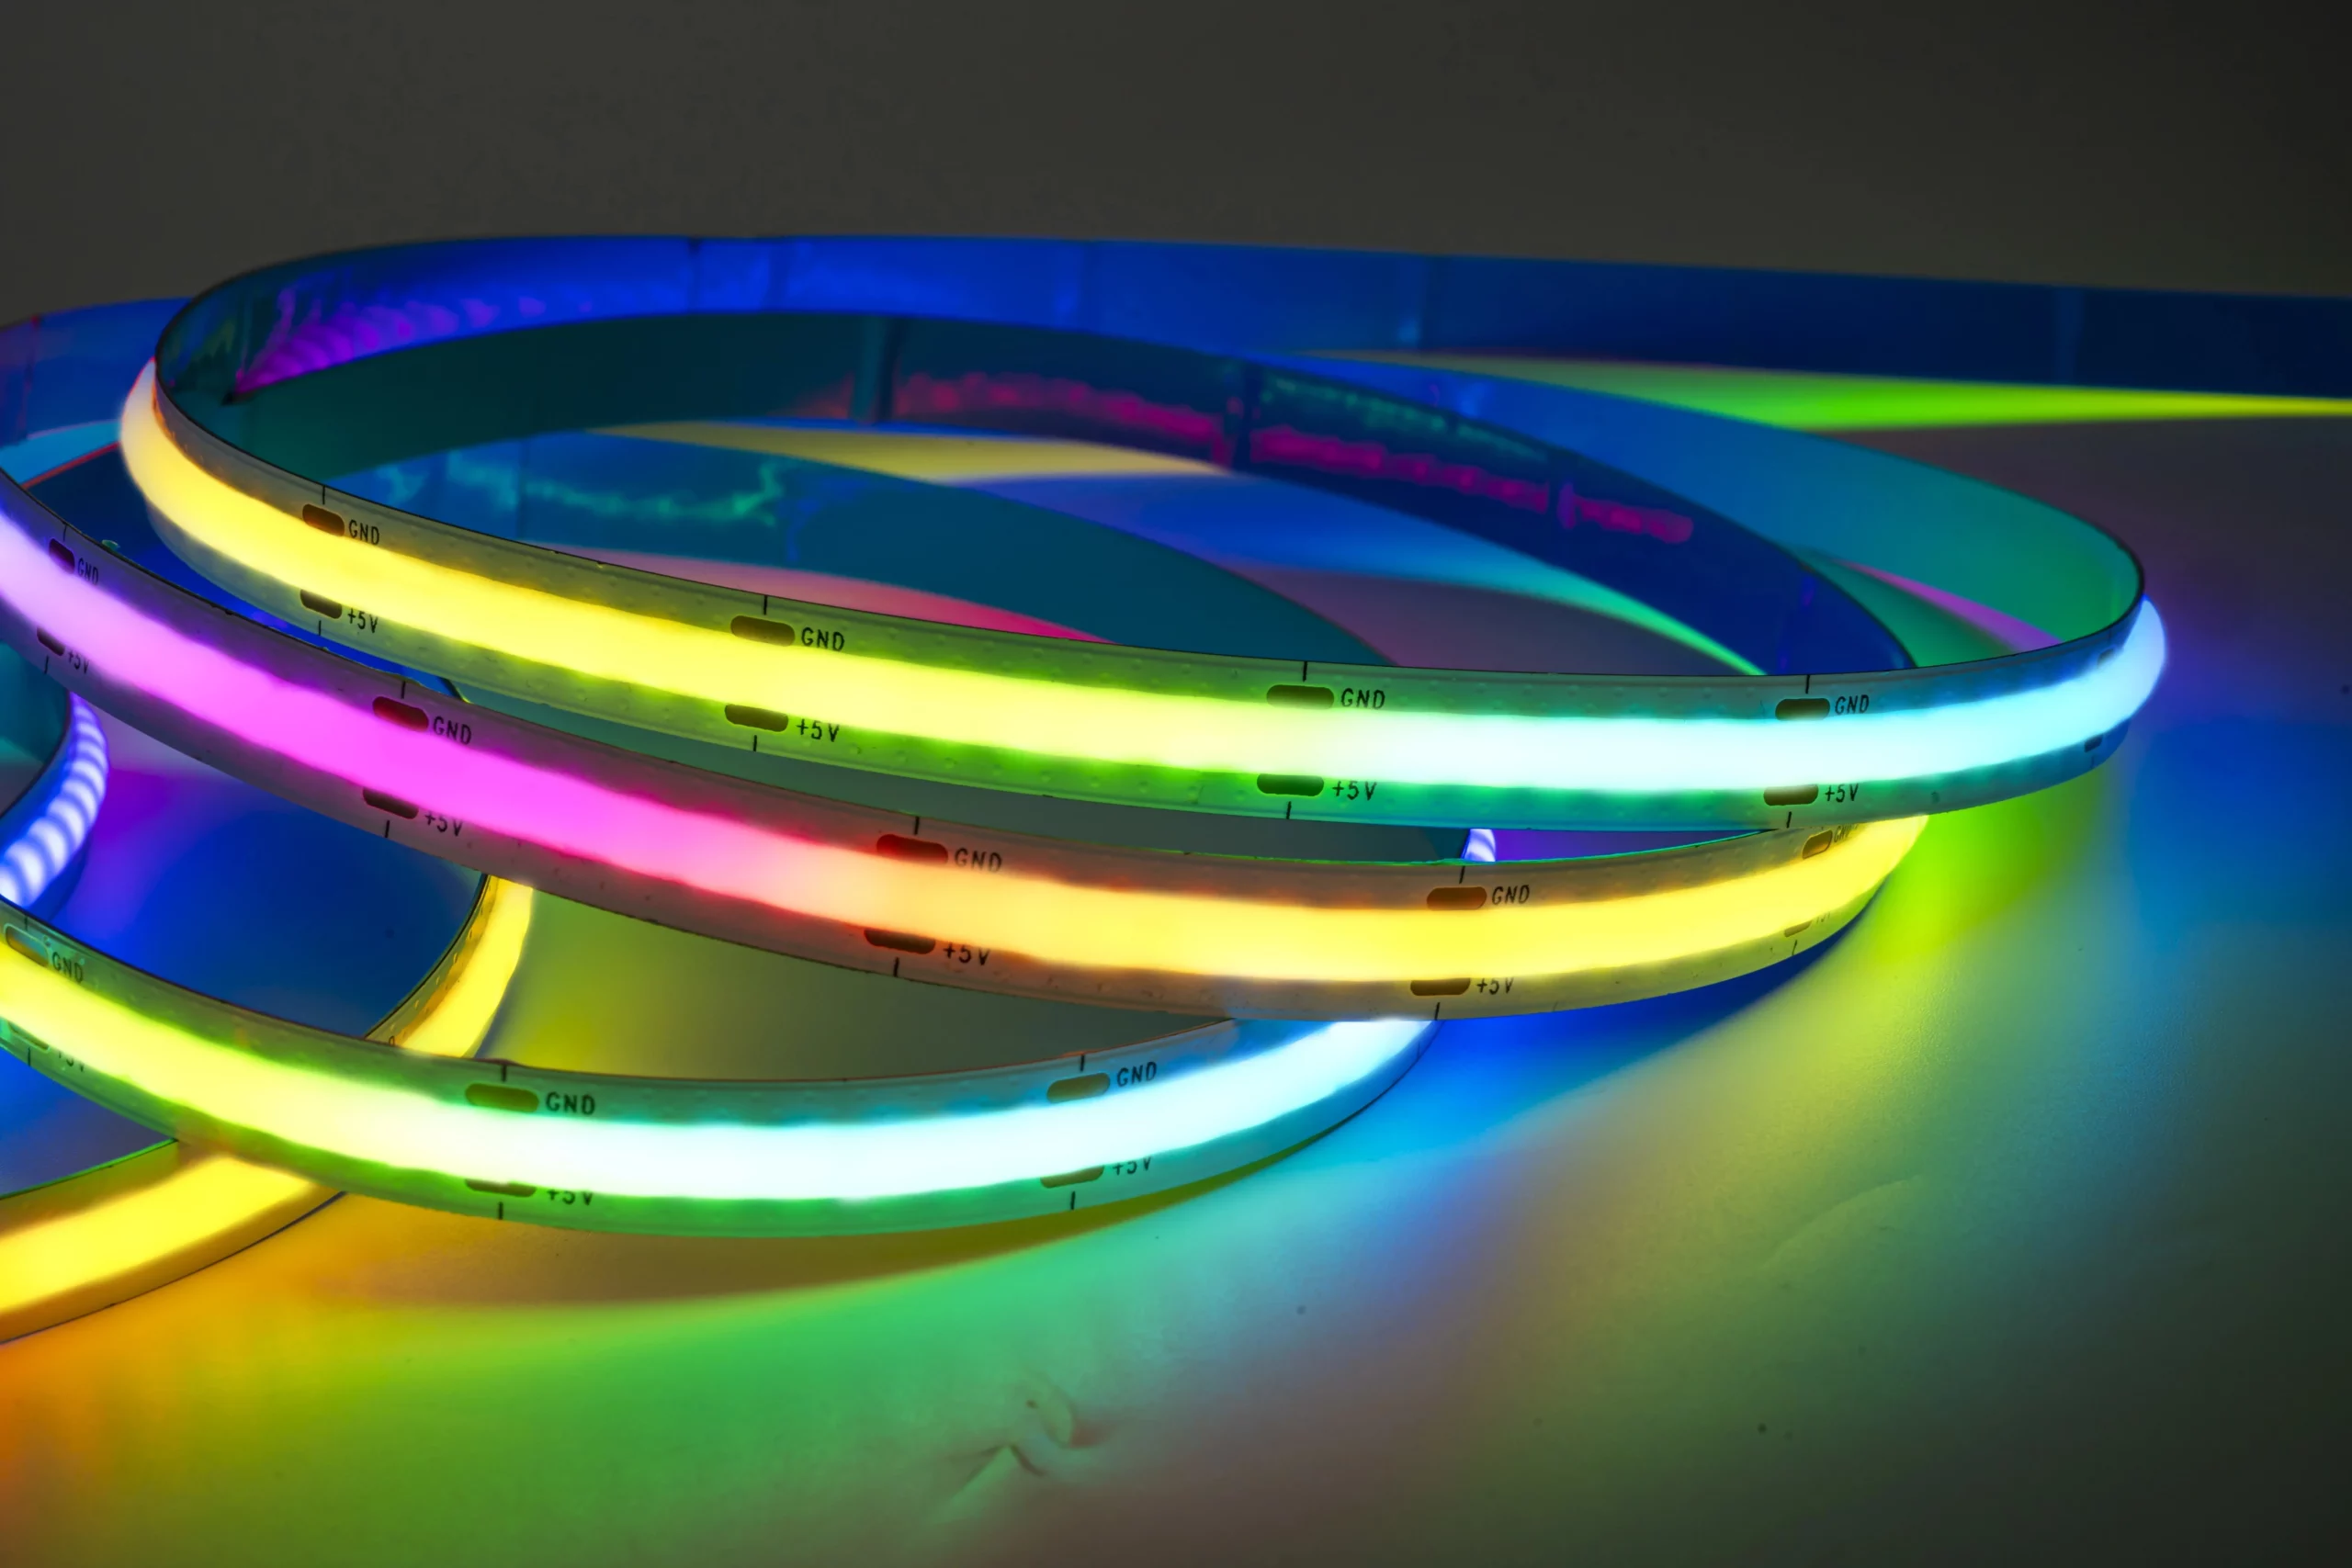 What is cob led strips? LED soft light strip is also called LED tape light strip, or flexible led light strips, and COB is the abbreviation of CHIP ON BOARD, which means that flip chip is arranged on the soft light strip, and the COB soft light strip looks like a soft tie Belt, with strong flexibility, folding and bending, there are light-emitting chips with small output power all over the surface, the overall light is uniform, soft and not dazzling, and the brightness is high. It usually replaces traditional lighting fixtures, so it is called LED COB Soft light strips. According to the different requirements of customers, various colors of light can be transmitted, The color tone is mild and beautiful, and it can be used as a simple lighting fixture or decorative design. COB FOB led light strip overall display, dotles cob led strip lights for lighting solutions.